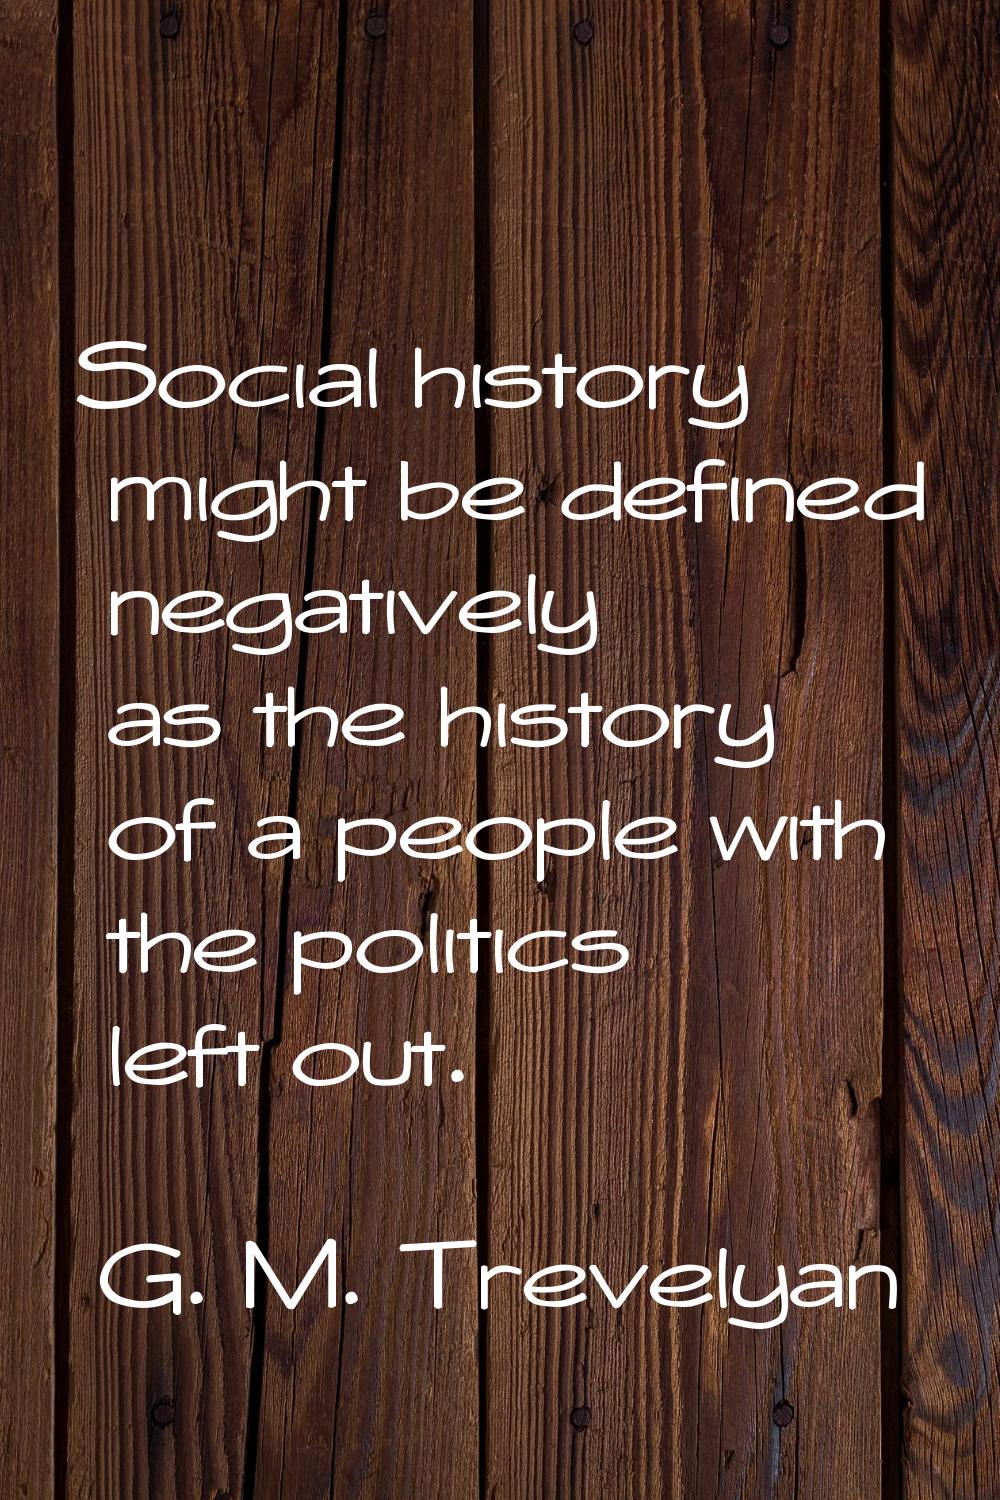 Social history might be defined negatively as the history of a people with the politics left out.